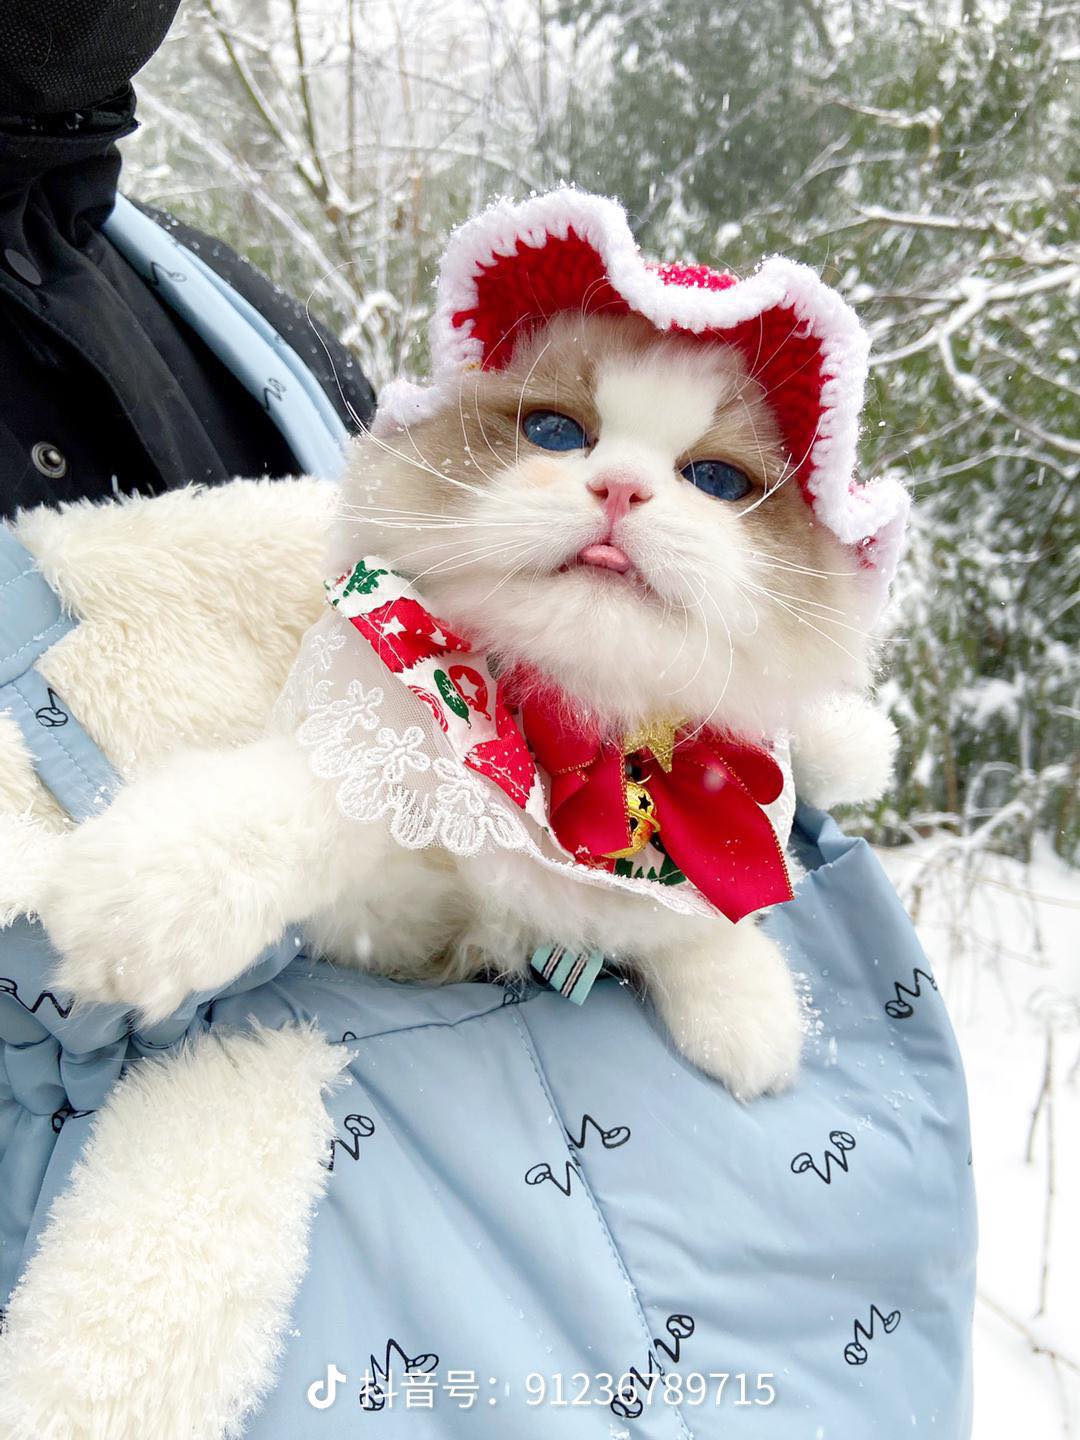 Introducing the cat nicknamed "snow princess" on social media with her stunning blue eyes. - Yeudon